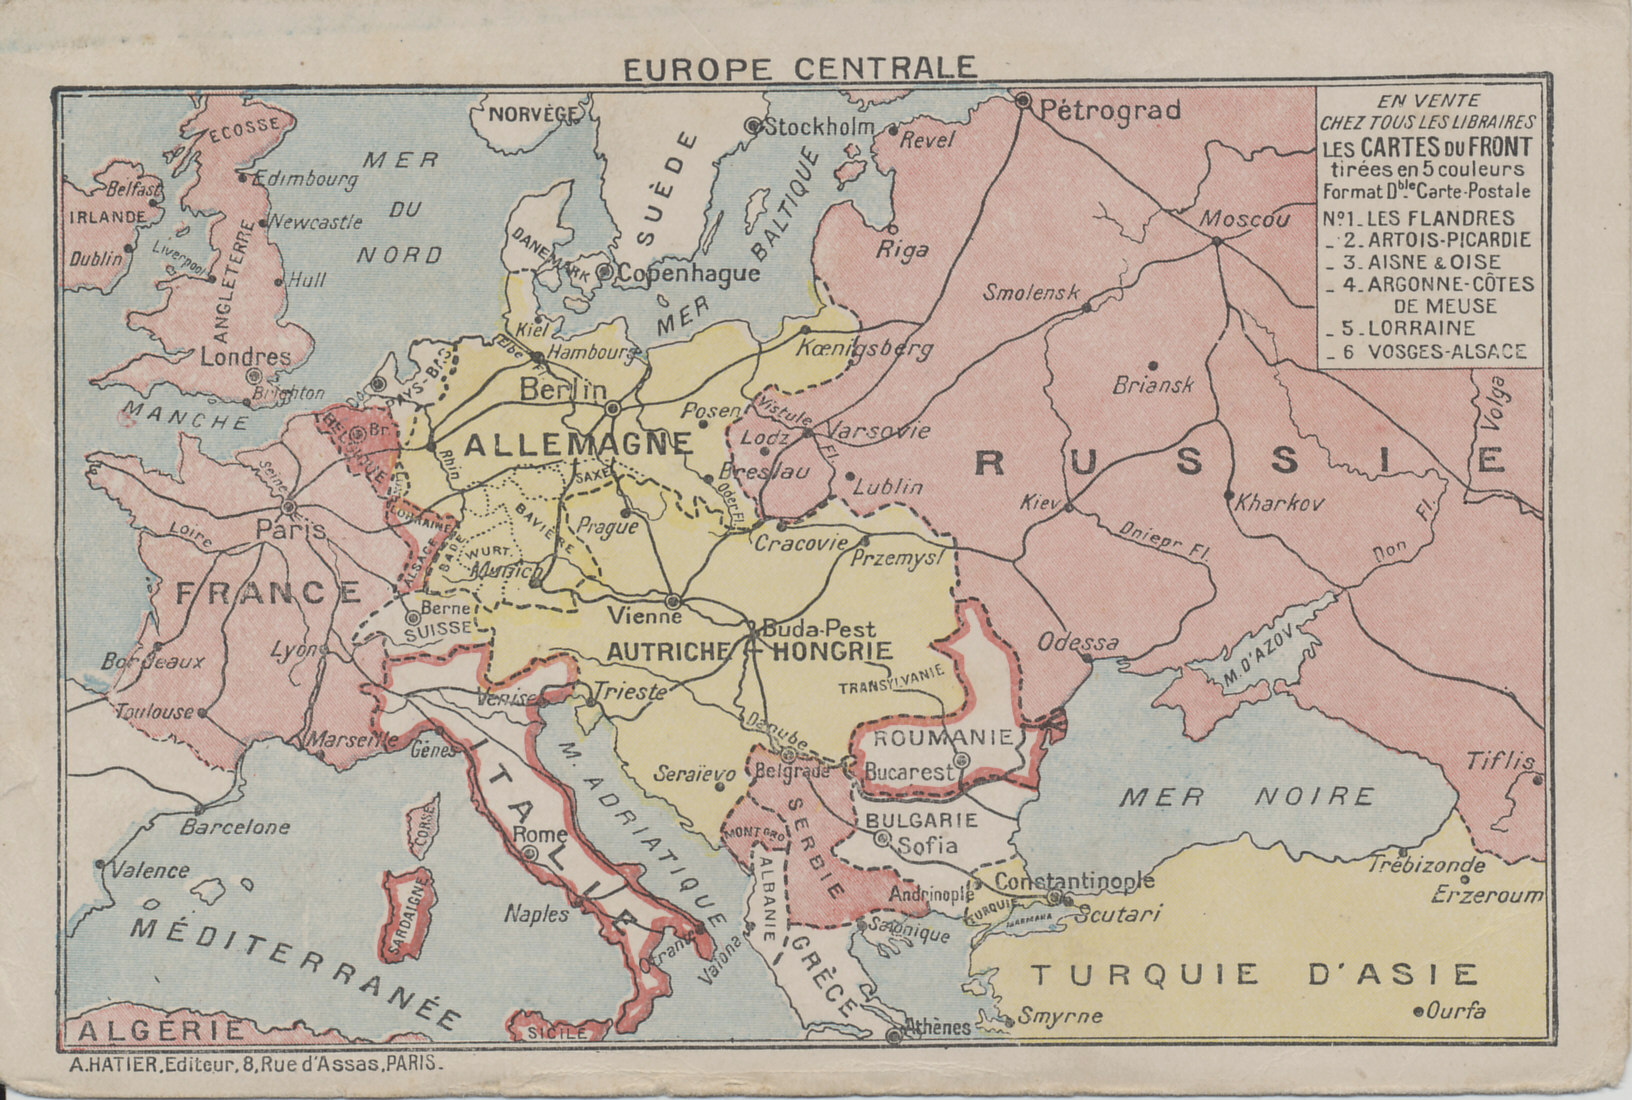 Number six in a series of folding postcards, each one showing one of the Western Front battlefields on the interior. The outer back shows a map of central Europe with the Entente Allies is pink and the Central Powers in Yellow. The map shows Europe after Turkey's entry into the war at the end of October, 1914, and before Italy's entry in May, 1915. The publisher may have hoped neutral Italy and Romania would soon join the Allies, and shows them outlined in pink.
Text:
Outer back:
Europe Centrale
En vente chez tous les libraries
Les cartes du front
tirées en 5 couleurs
format double carte postale
No. 1. Les Flandres
_ 2. Artois-Picardie
_ 3. Aisne & Oise
_ 4. Argonne-Côte de Meuse
_ 5. Lorraine
_ 6. Vosges-Alsace
A. Hatier. Editeur.8.Rue d'Assas, Paris.
Inner detailed map:
Les Cartes du Front.
No. 6. Vosges-Alsace.
Chemin de fer, voie norm[a]le
" voie étroite
Route principale
Fleuve ou rivière
Canal du navigation
Fort
Kilometres
Outer front:
Correspondence des Armees
Franchise Militaire

Central Europe
Available at all libraries
Cards of the Front
drawn in 5 colors
Double postcard size
No. 1. Flanders
_ 2. Artois-Picardie
_ 3. Oise Aisne &
_ 4. Argonne-Meuse Coast
_ 5. Lorraine
_ 6. Alsace-Vosges
A. Hatier. Publisher.8.Rue d'Assas, Paris.
Inner detailed map:
Cards of the Front
No 6. Alsace-Vosges.
Normal Railroad
Narrow Gauge Railroad
Major road
River or stream
Navigable canal
Fort
Kilometres
Outer front:
Correspondence of the Armies
Military Franchise